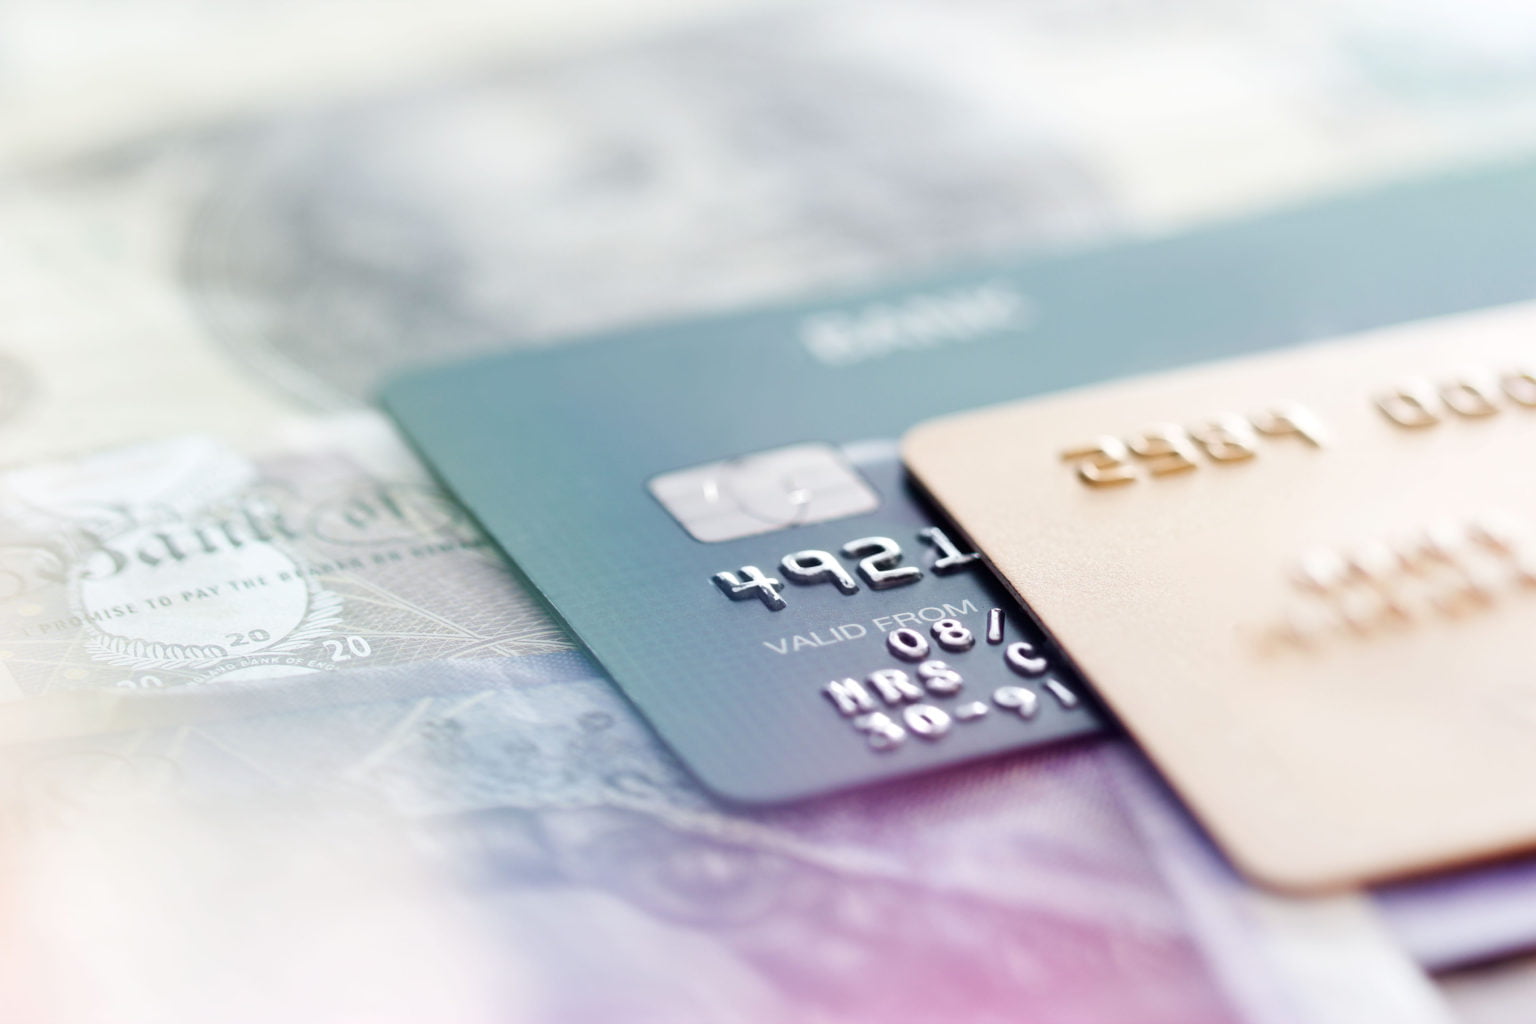 Credit cards on a banknotes background